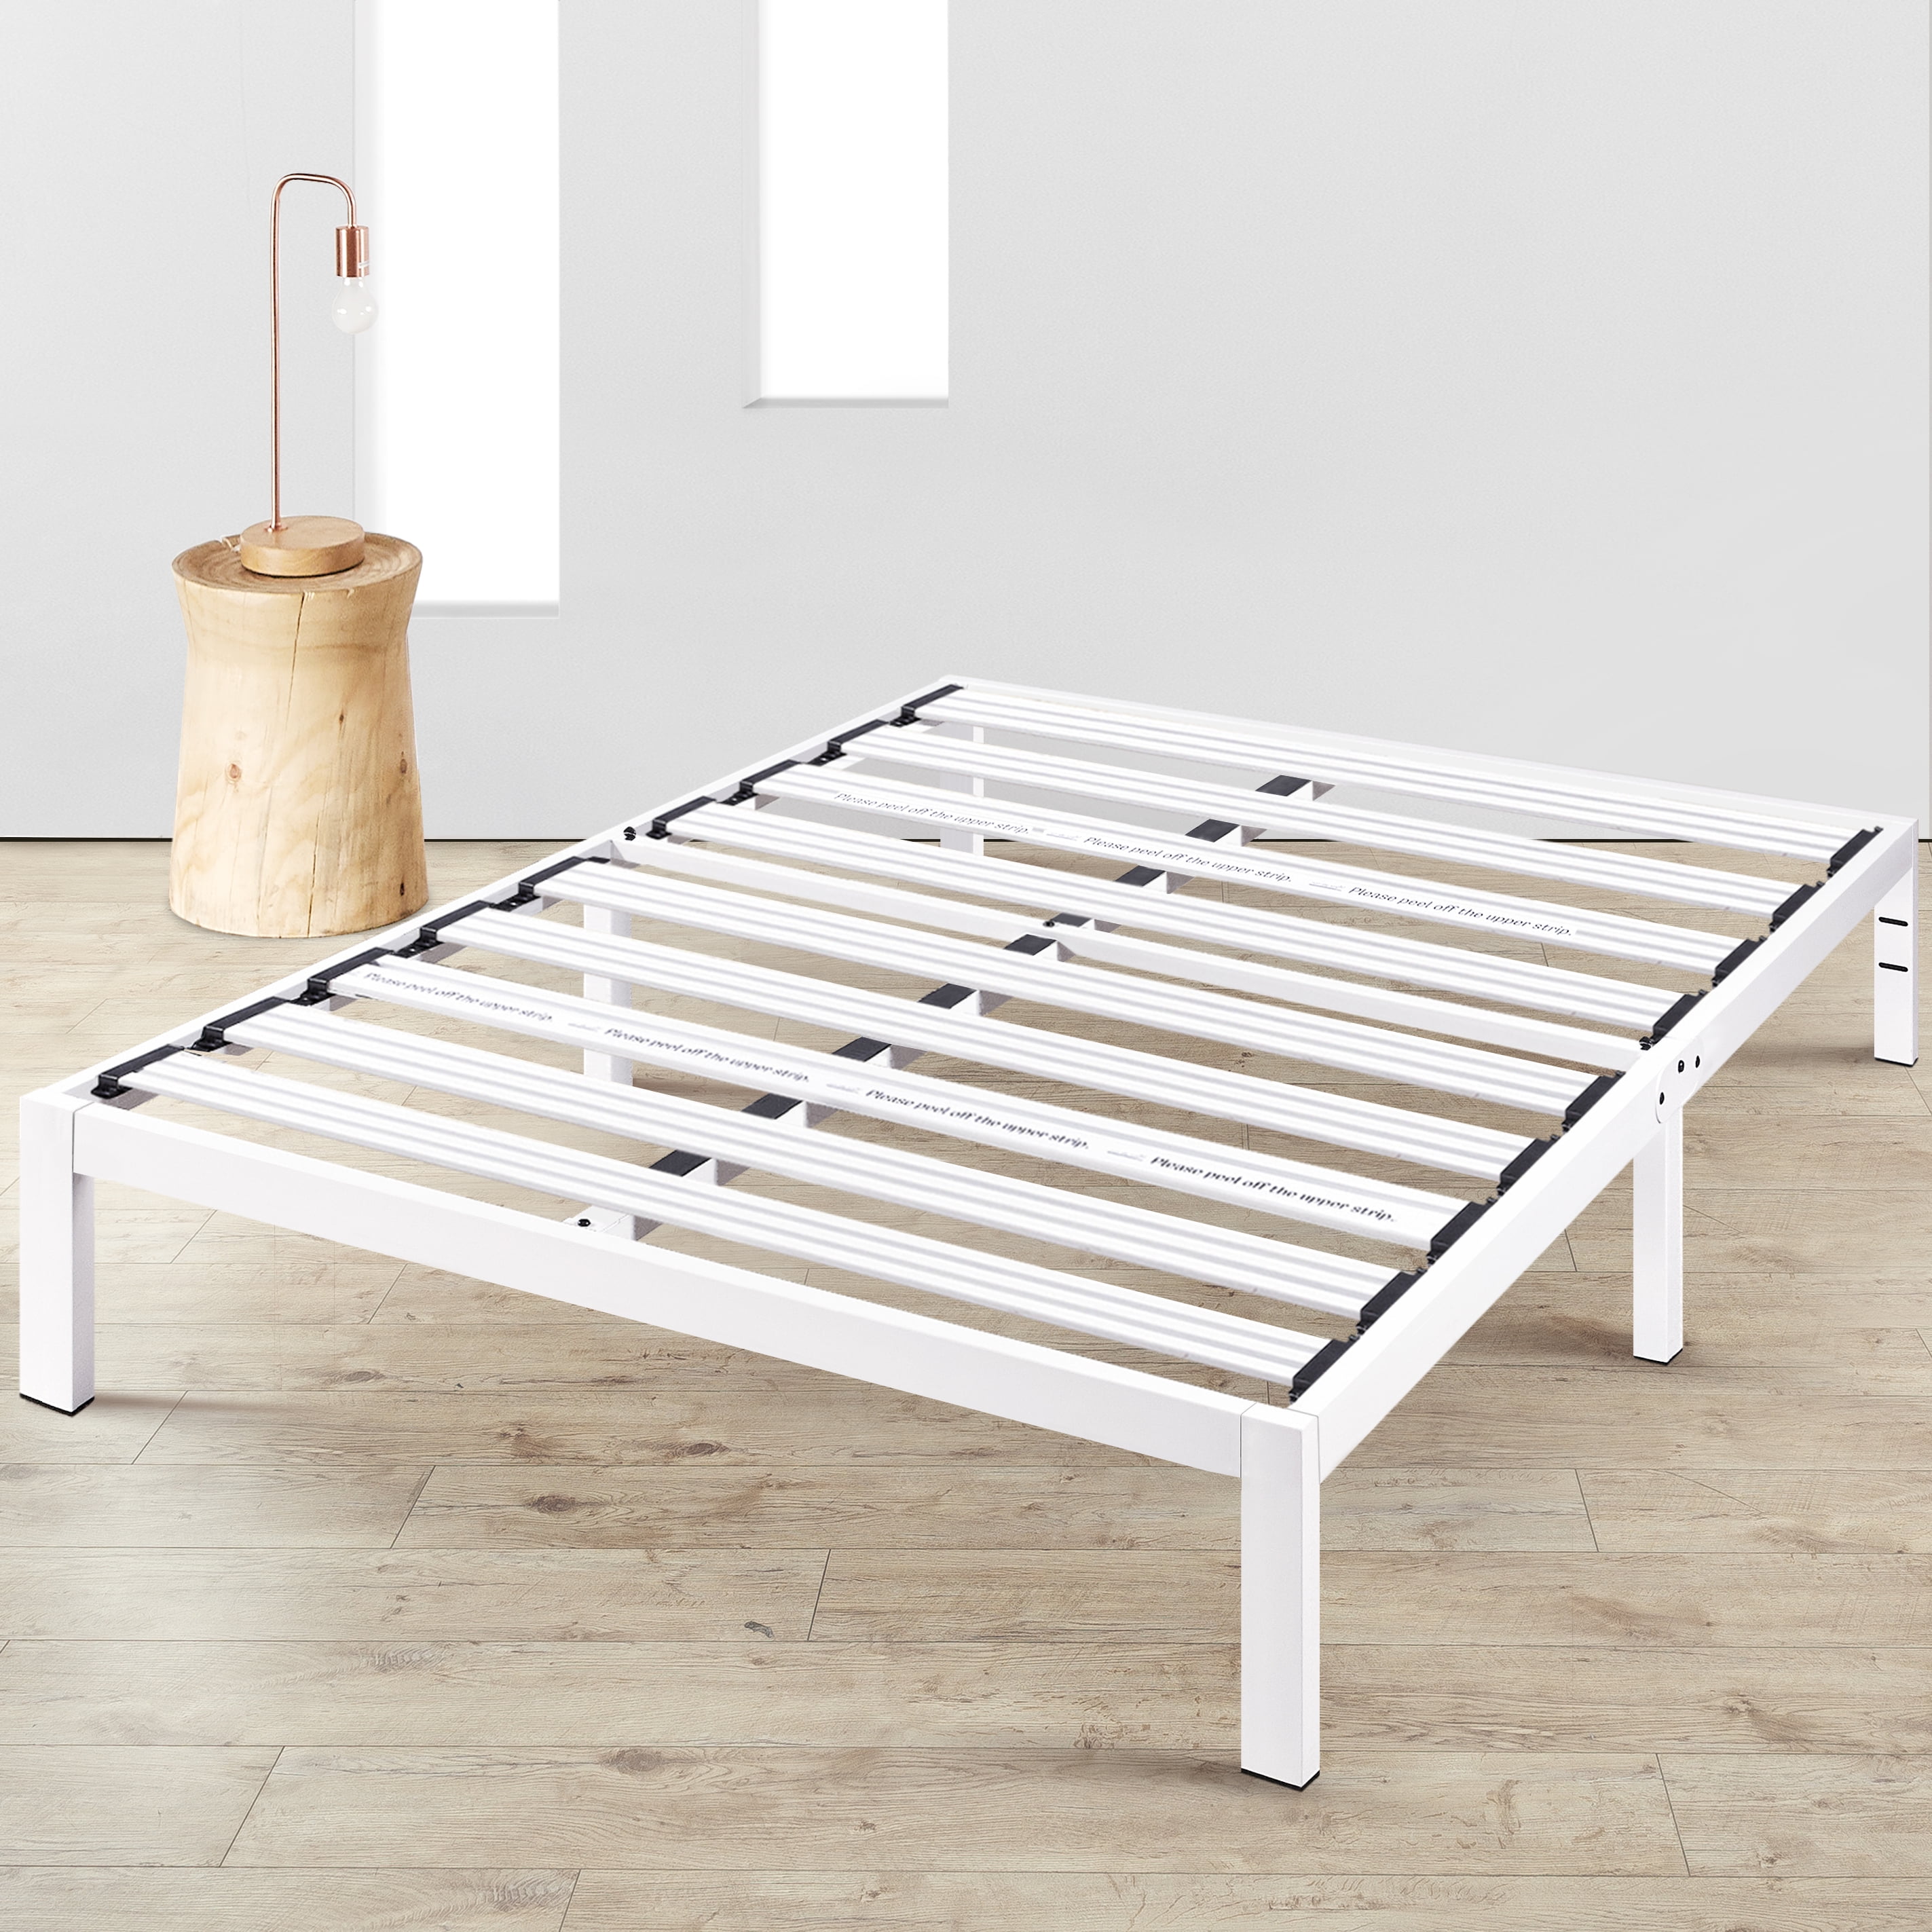 Mellow Rocky Base E Metal Platform Bed with Patented Wide Steel Slats